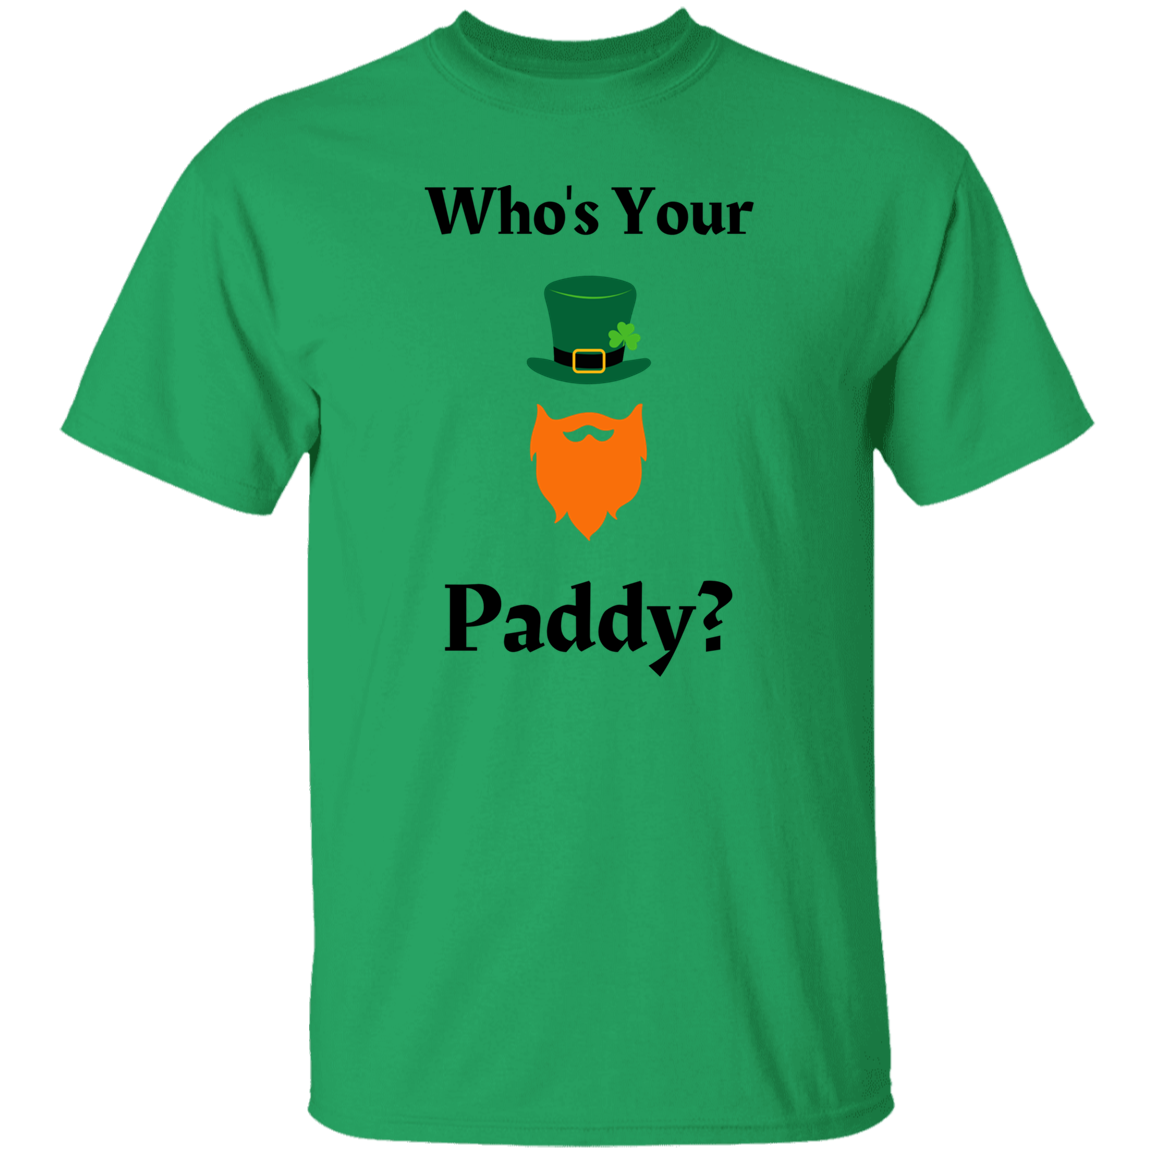 Who's Your Paddy? T-Shirt